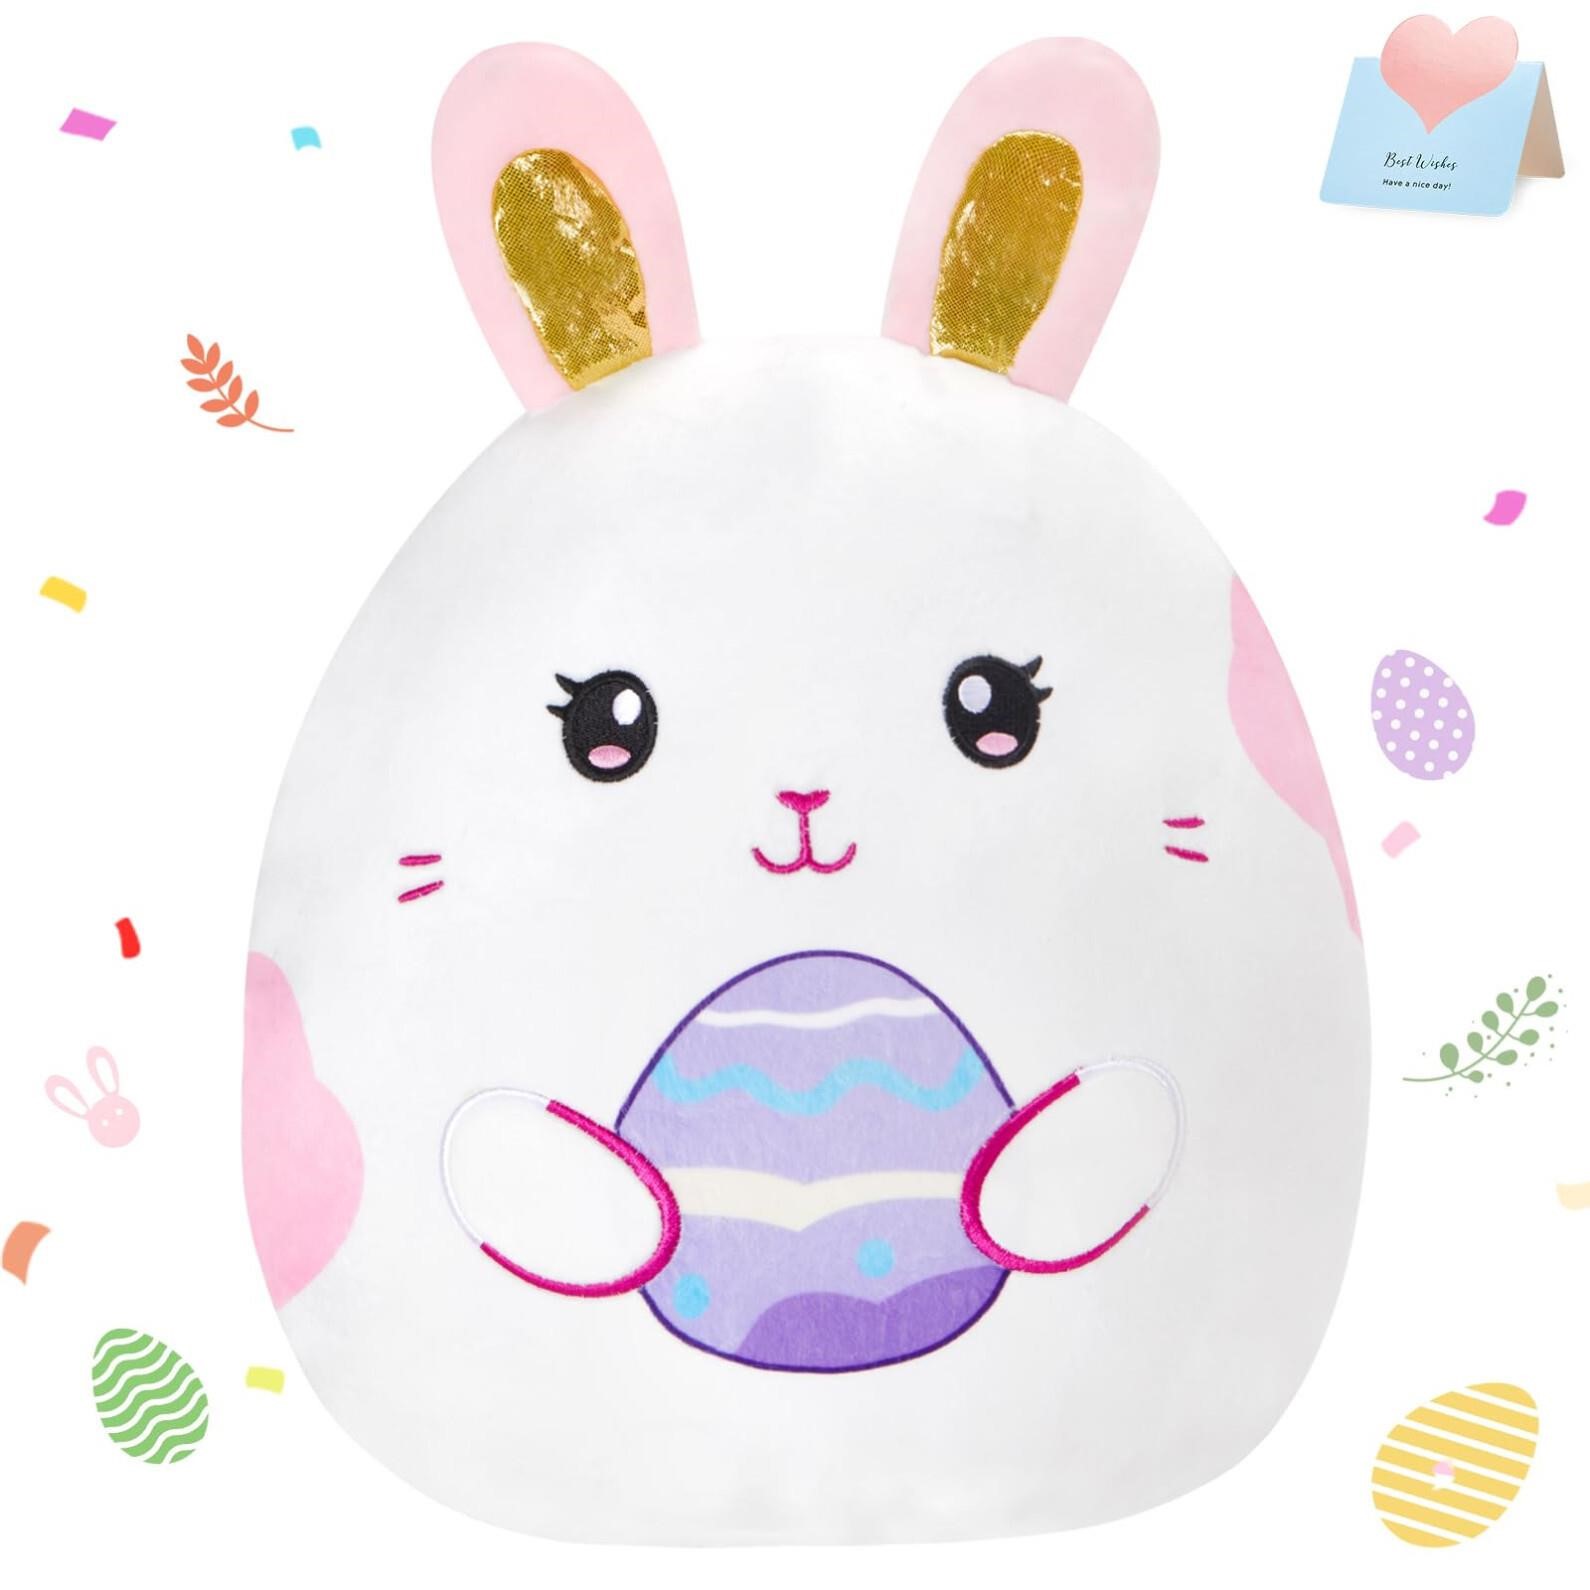 WEWILL 15 Easter Bunny Plush Pillow with Cute Bu